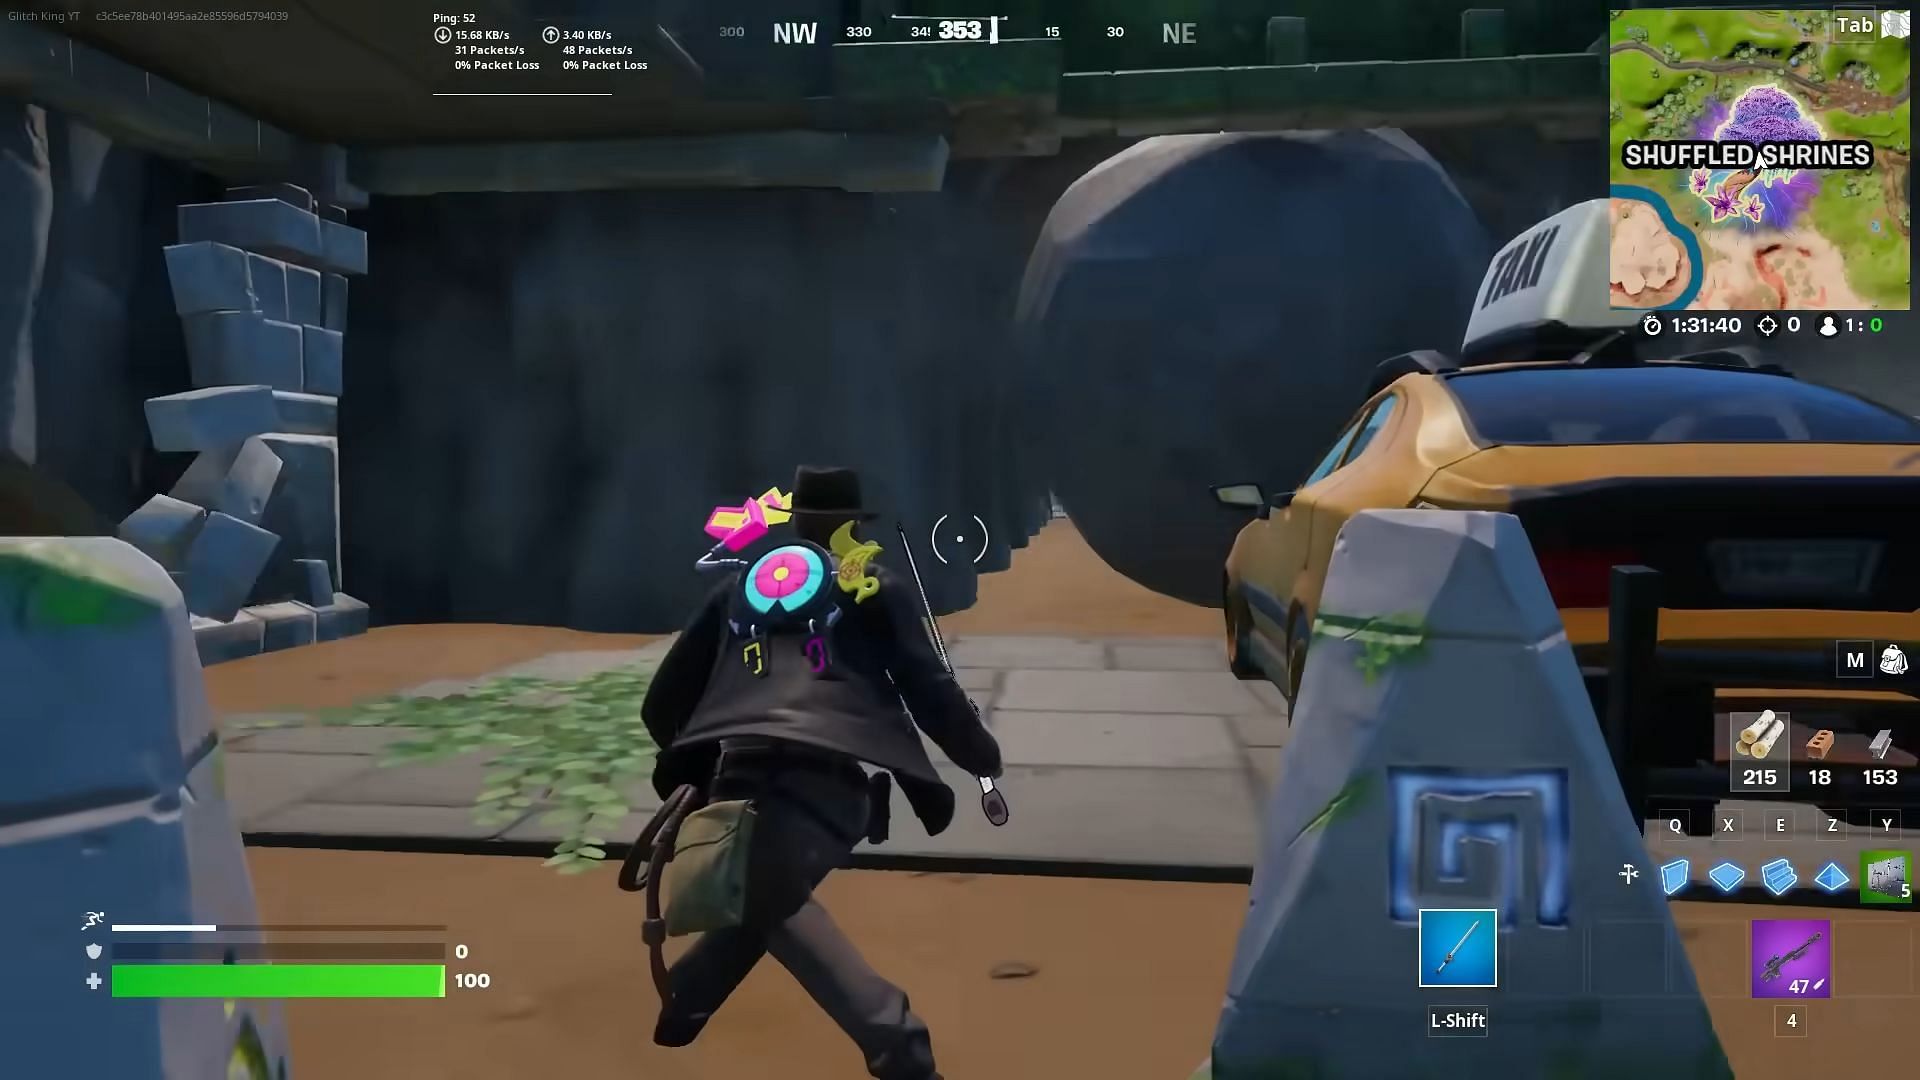 There is a boulder loose in Fortnite (Image via GKI/YouTube)